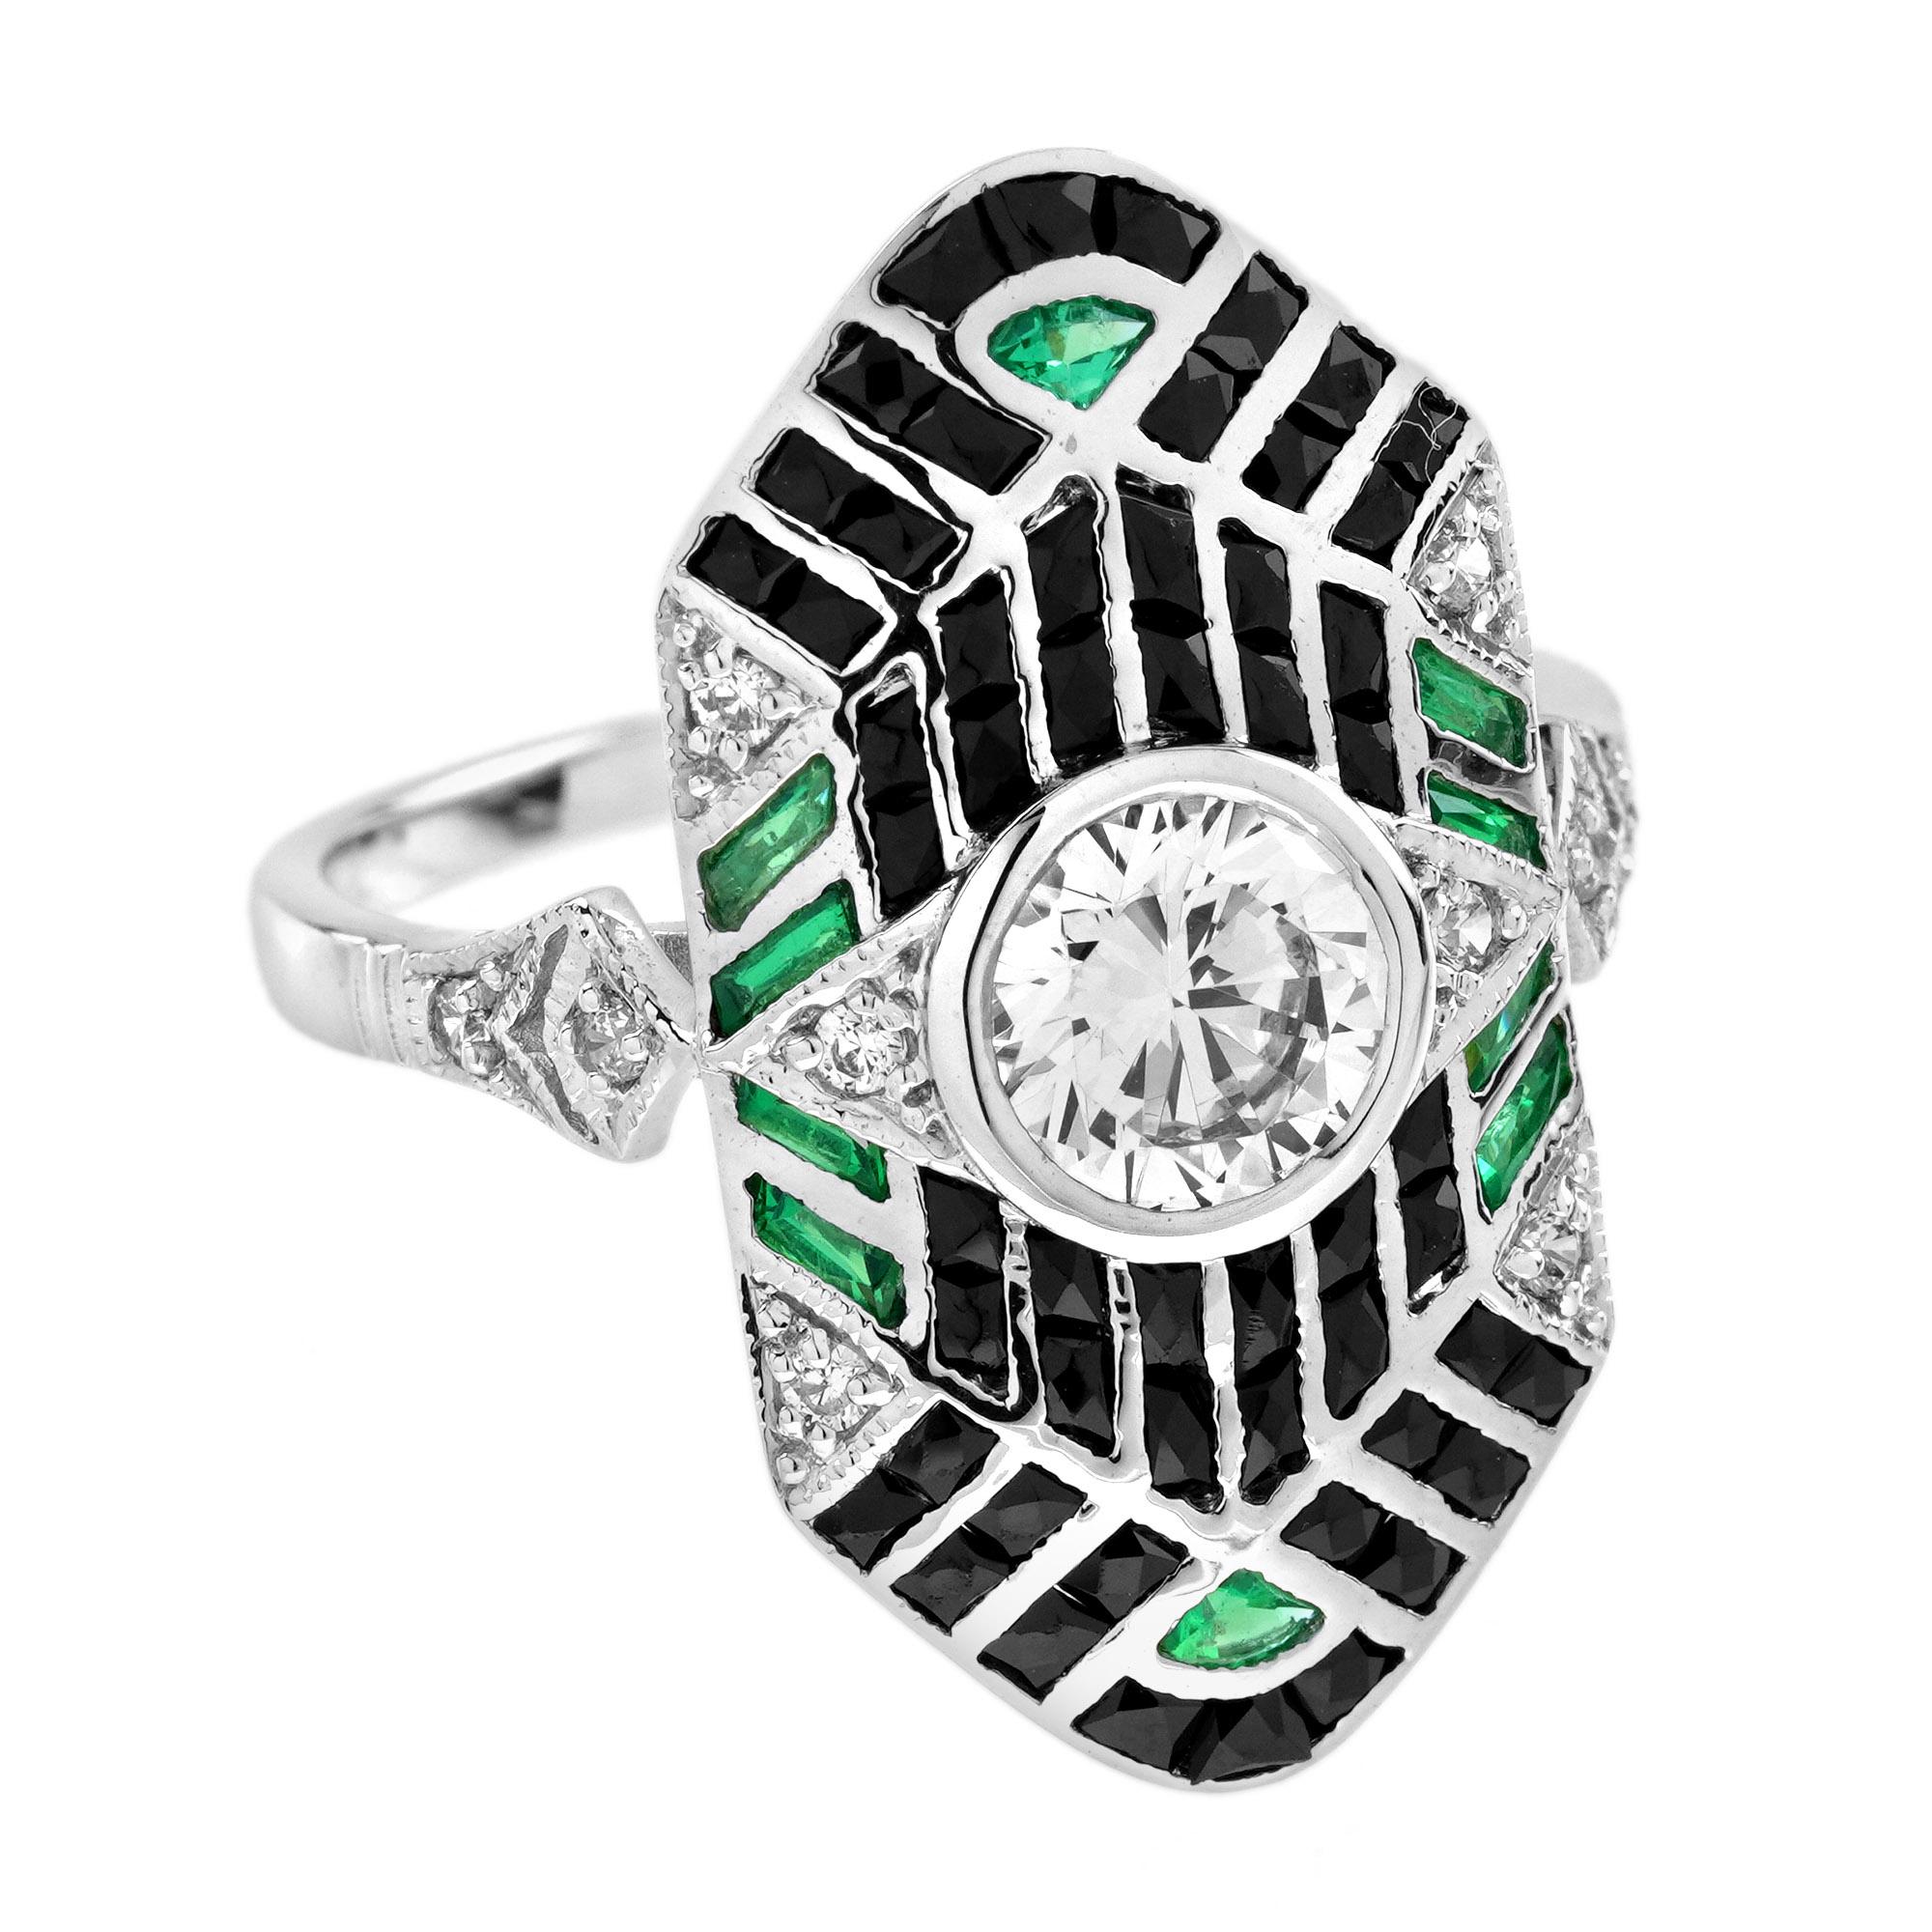 Round Cut Diamond Emerald Onyx Art Deco Style Geometric Dinner Ring in 18K White Gold For Sale